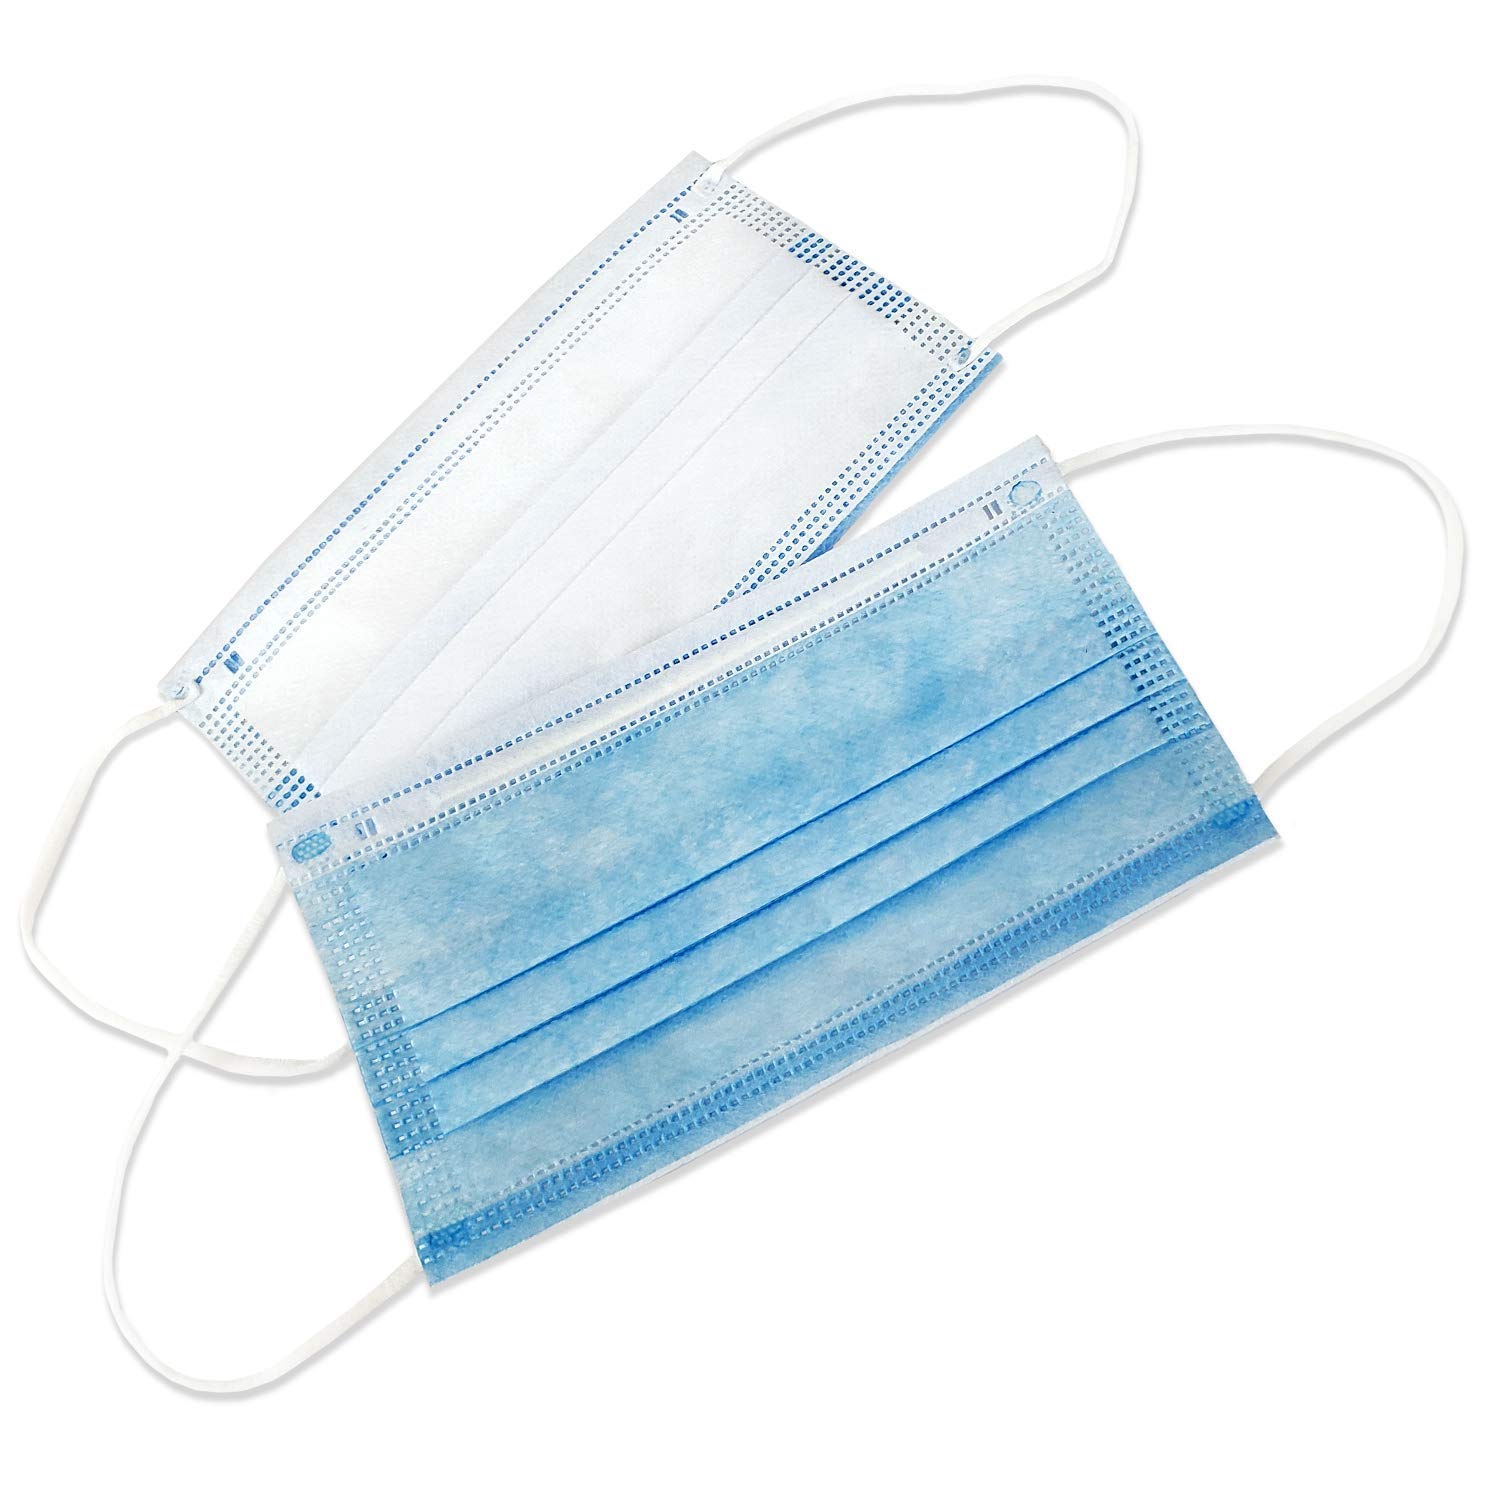 10 Pieces of 3-Layer Disposable Medical Face Mask Personal Elastic Earloop Hygiene Face Shield